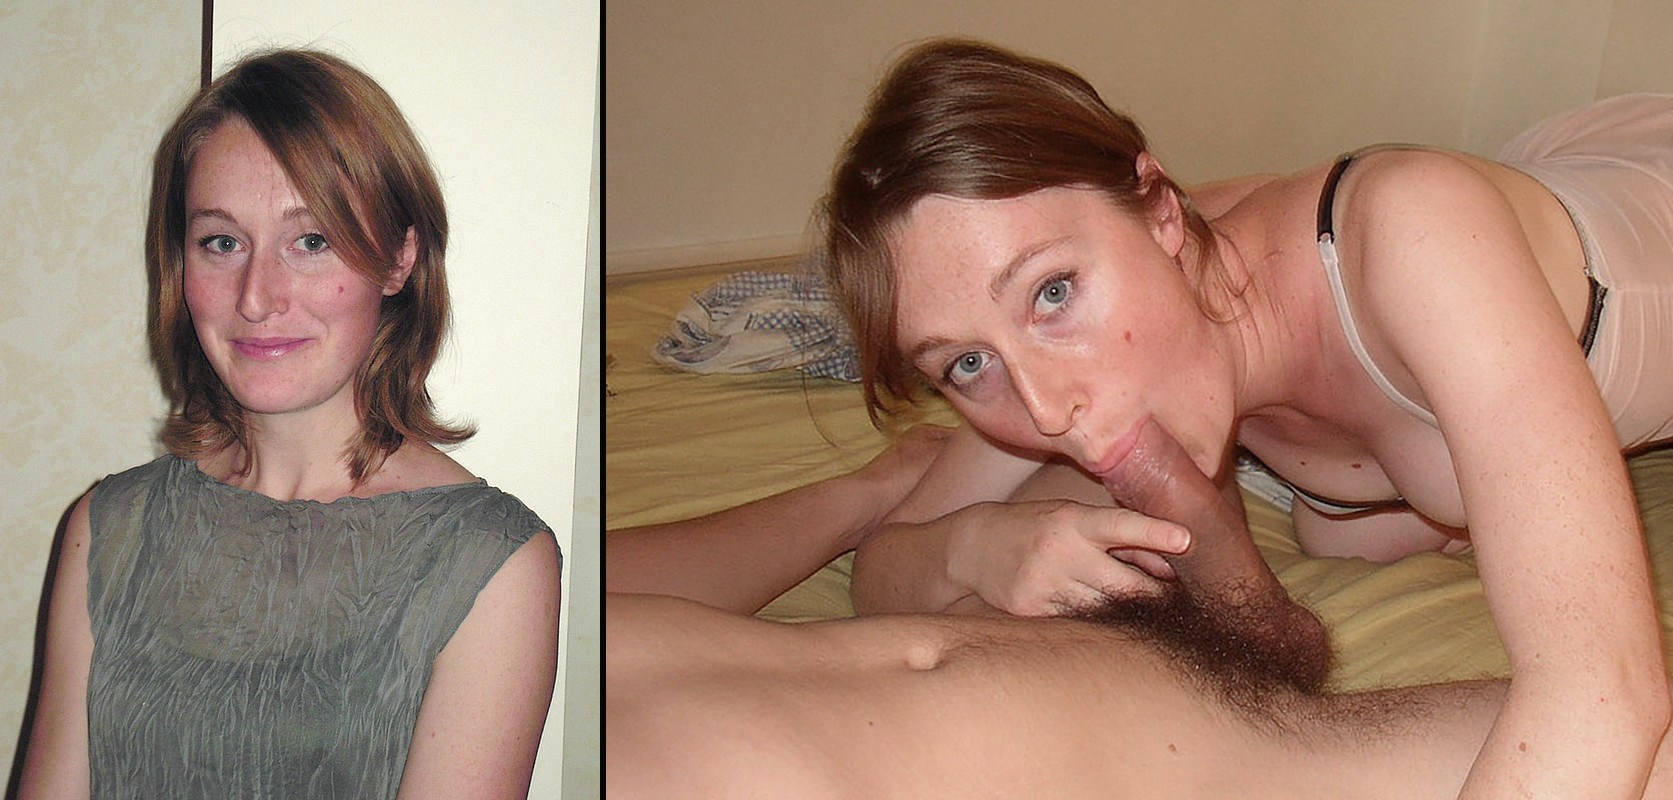 Before And After Wives Blowjob - The WiFe Undressed for Her Husband (52 photos) - motherless porn pics